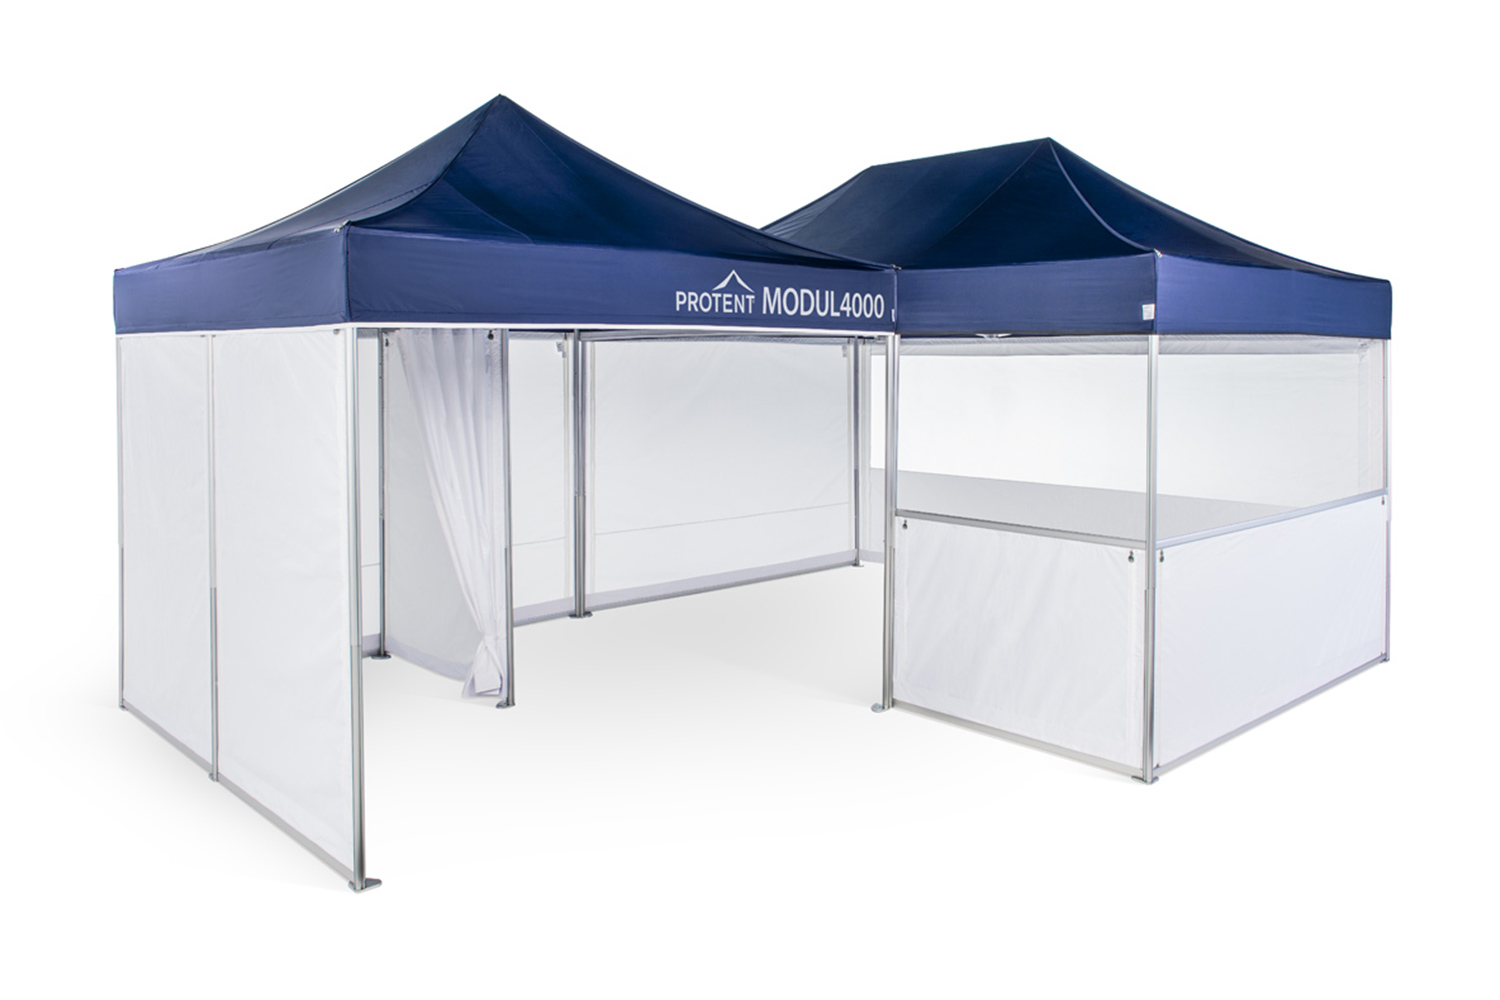 Two COVID-19 sanitation tents are combined.